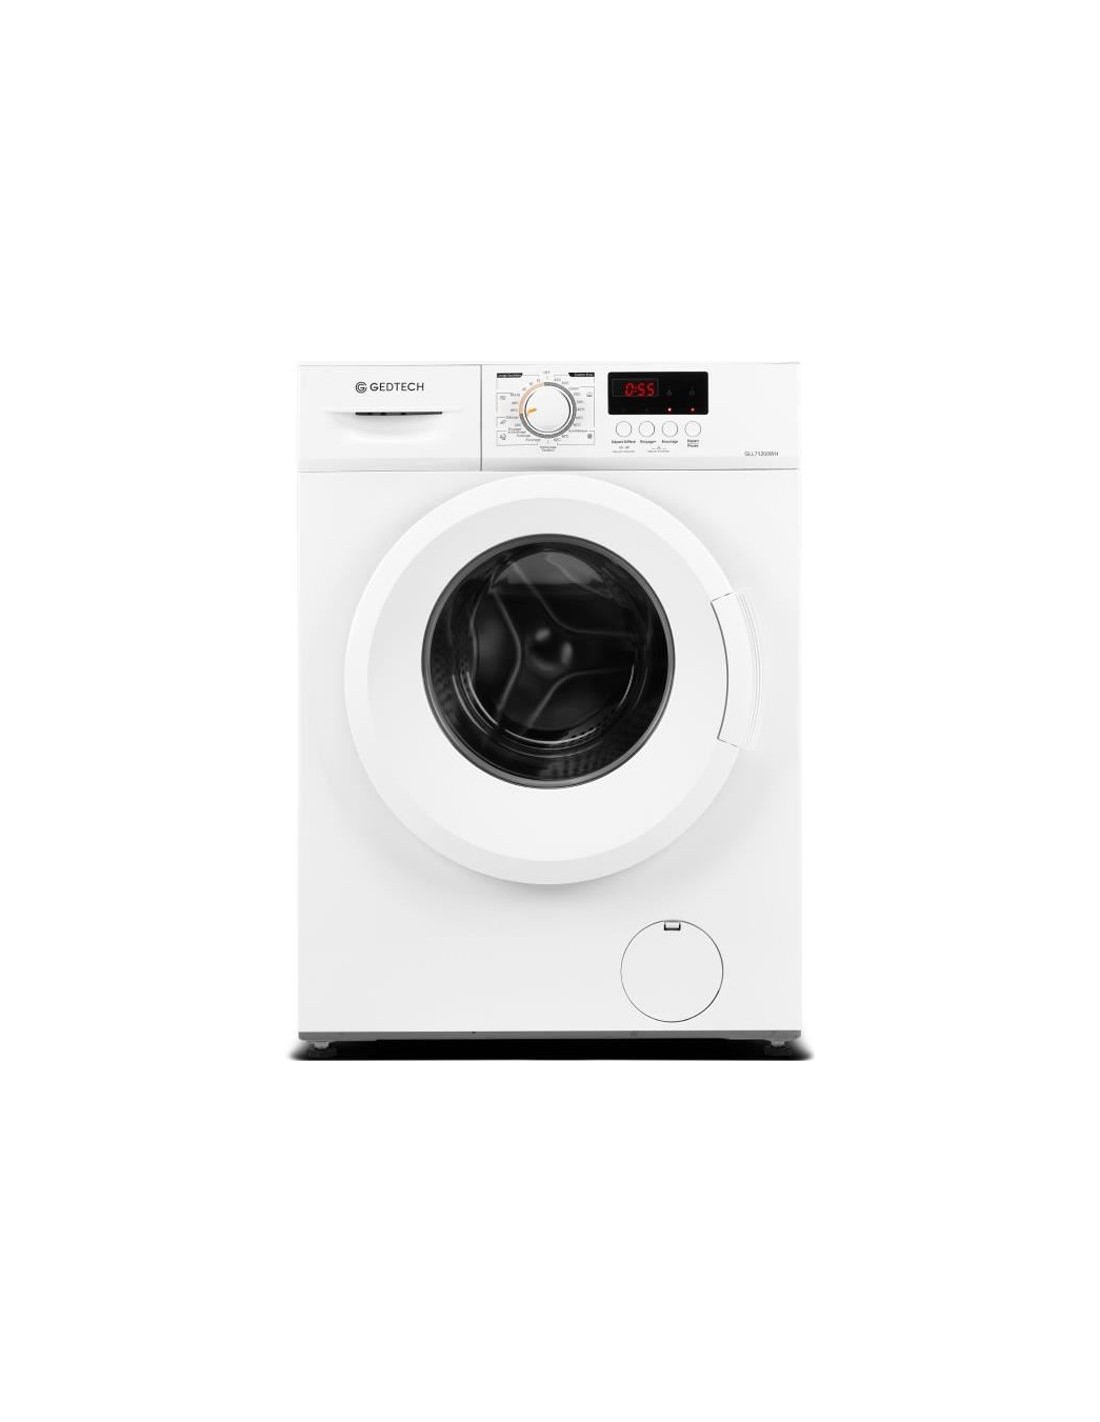 GEDTECH GLL81400WH Lave linge frontal - 8 Kg - 1400 Trs - E - LED